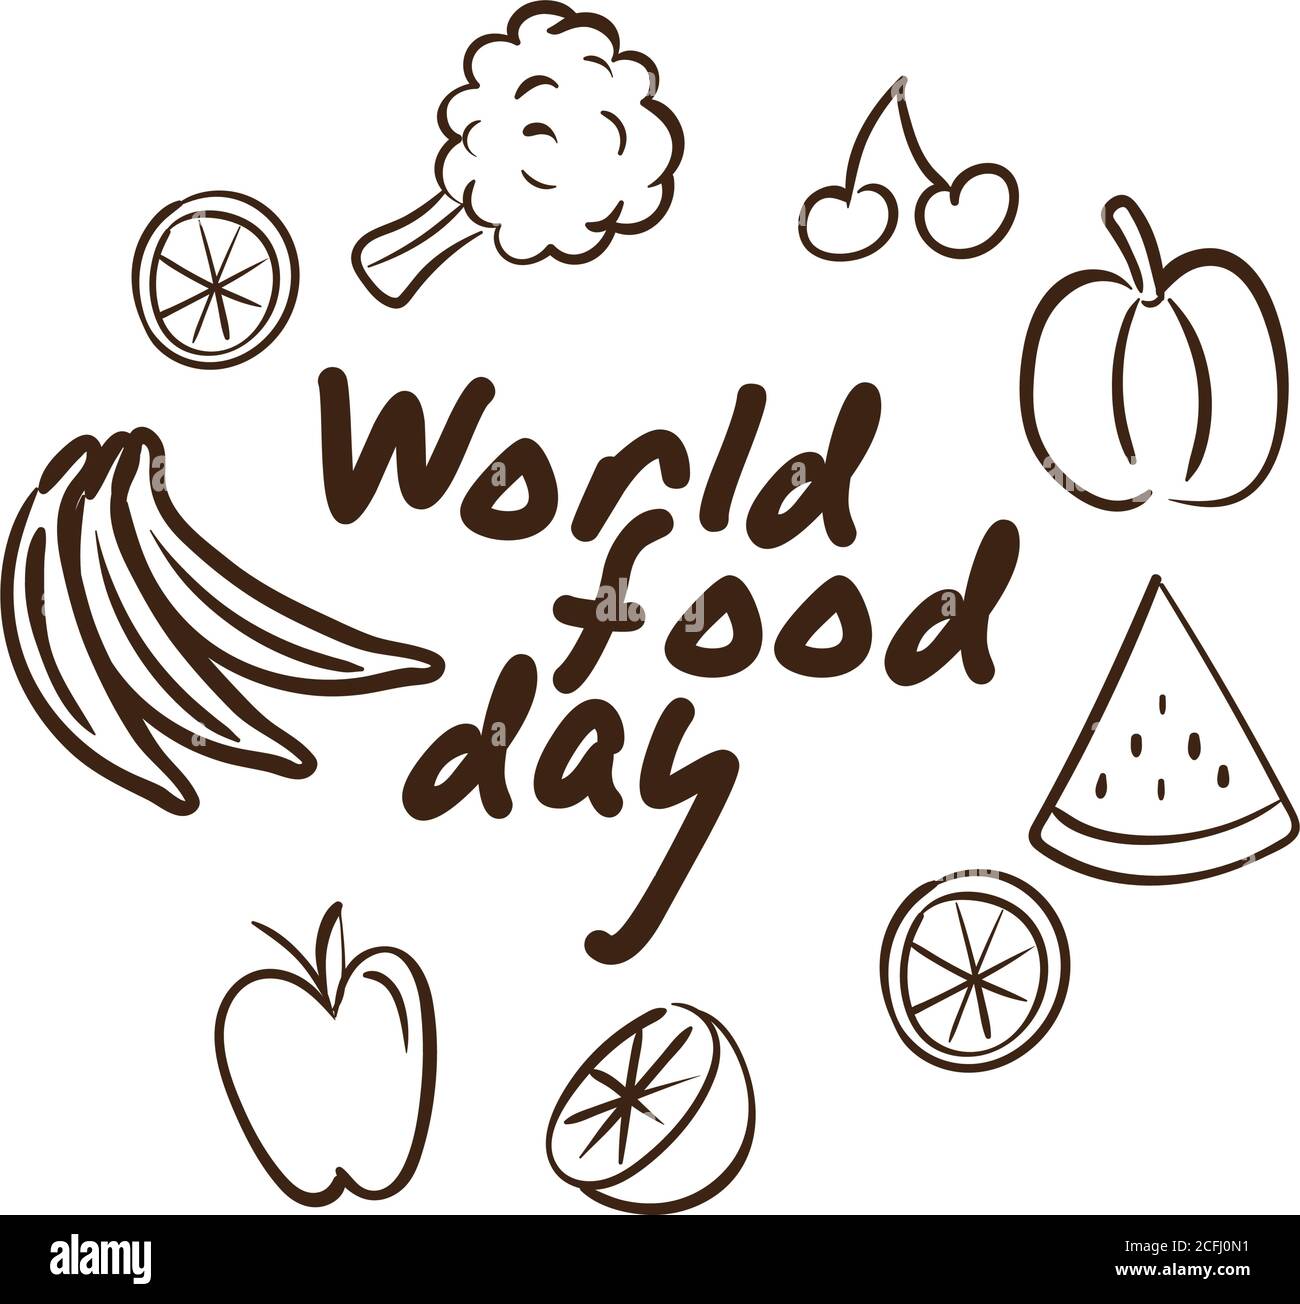 World Food Day. Edible Letters Stock Vector - Illustration of ecology,  food: 227094743